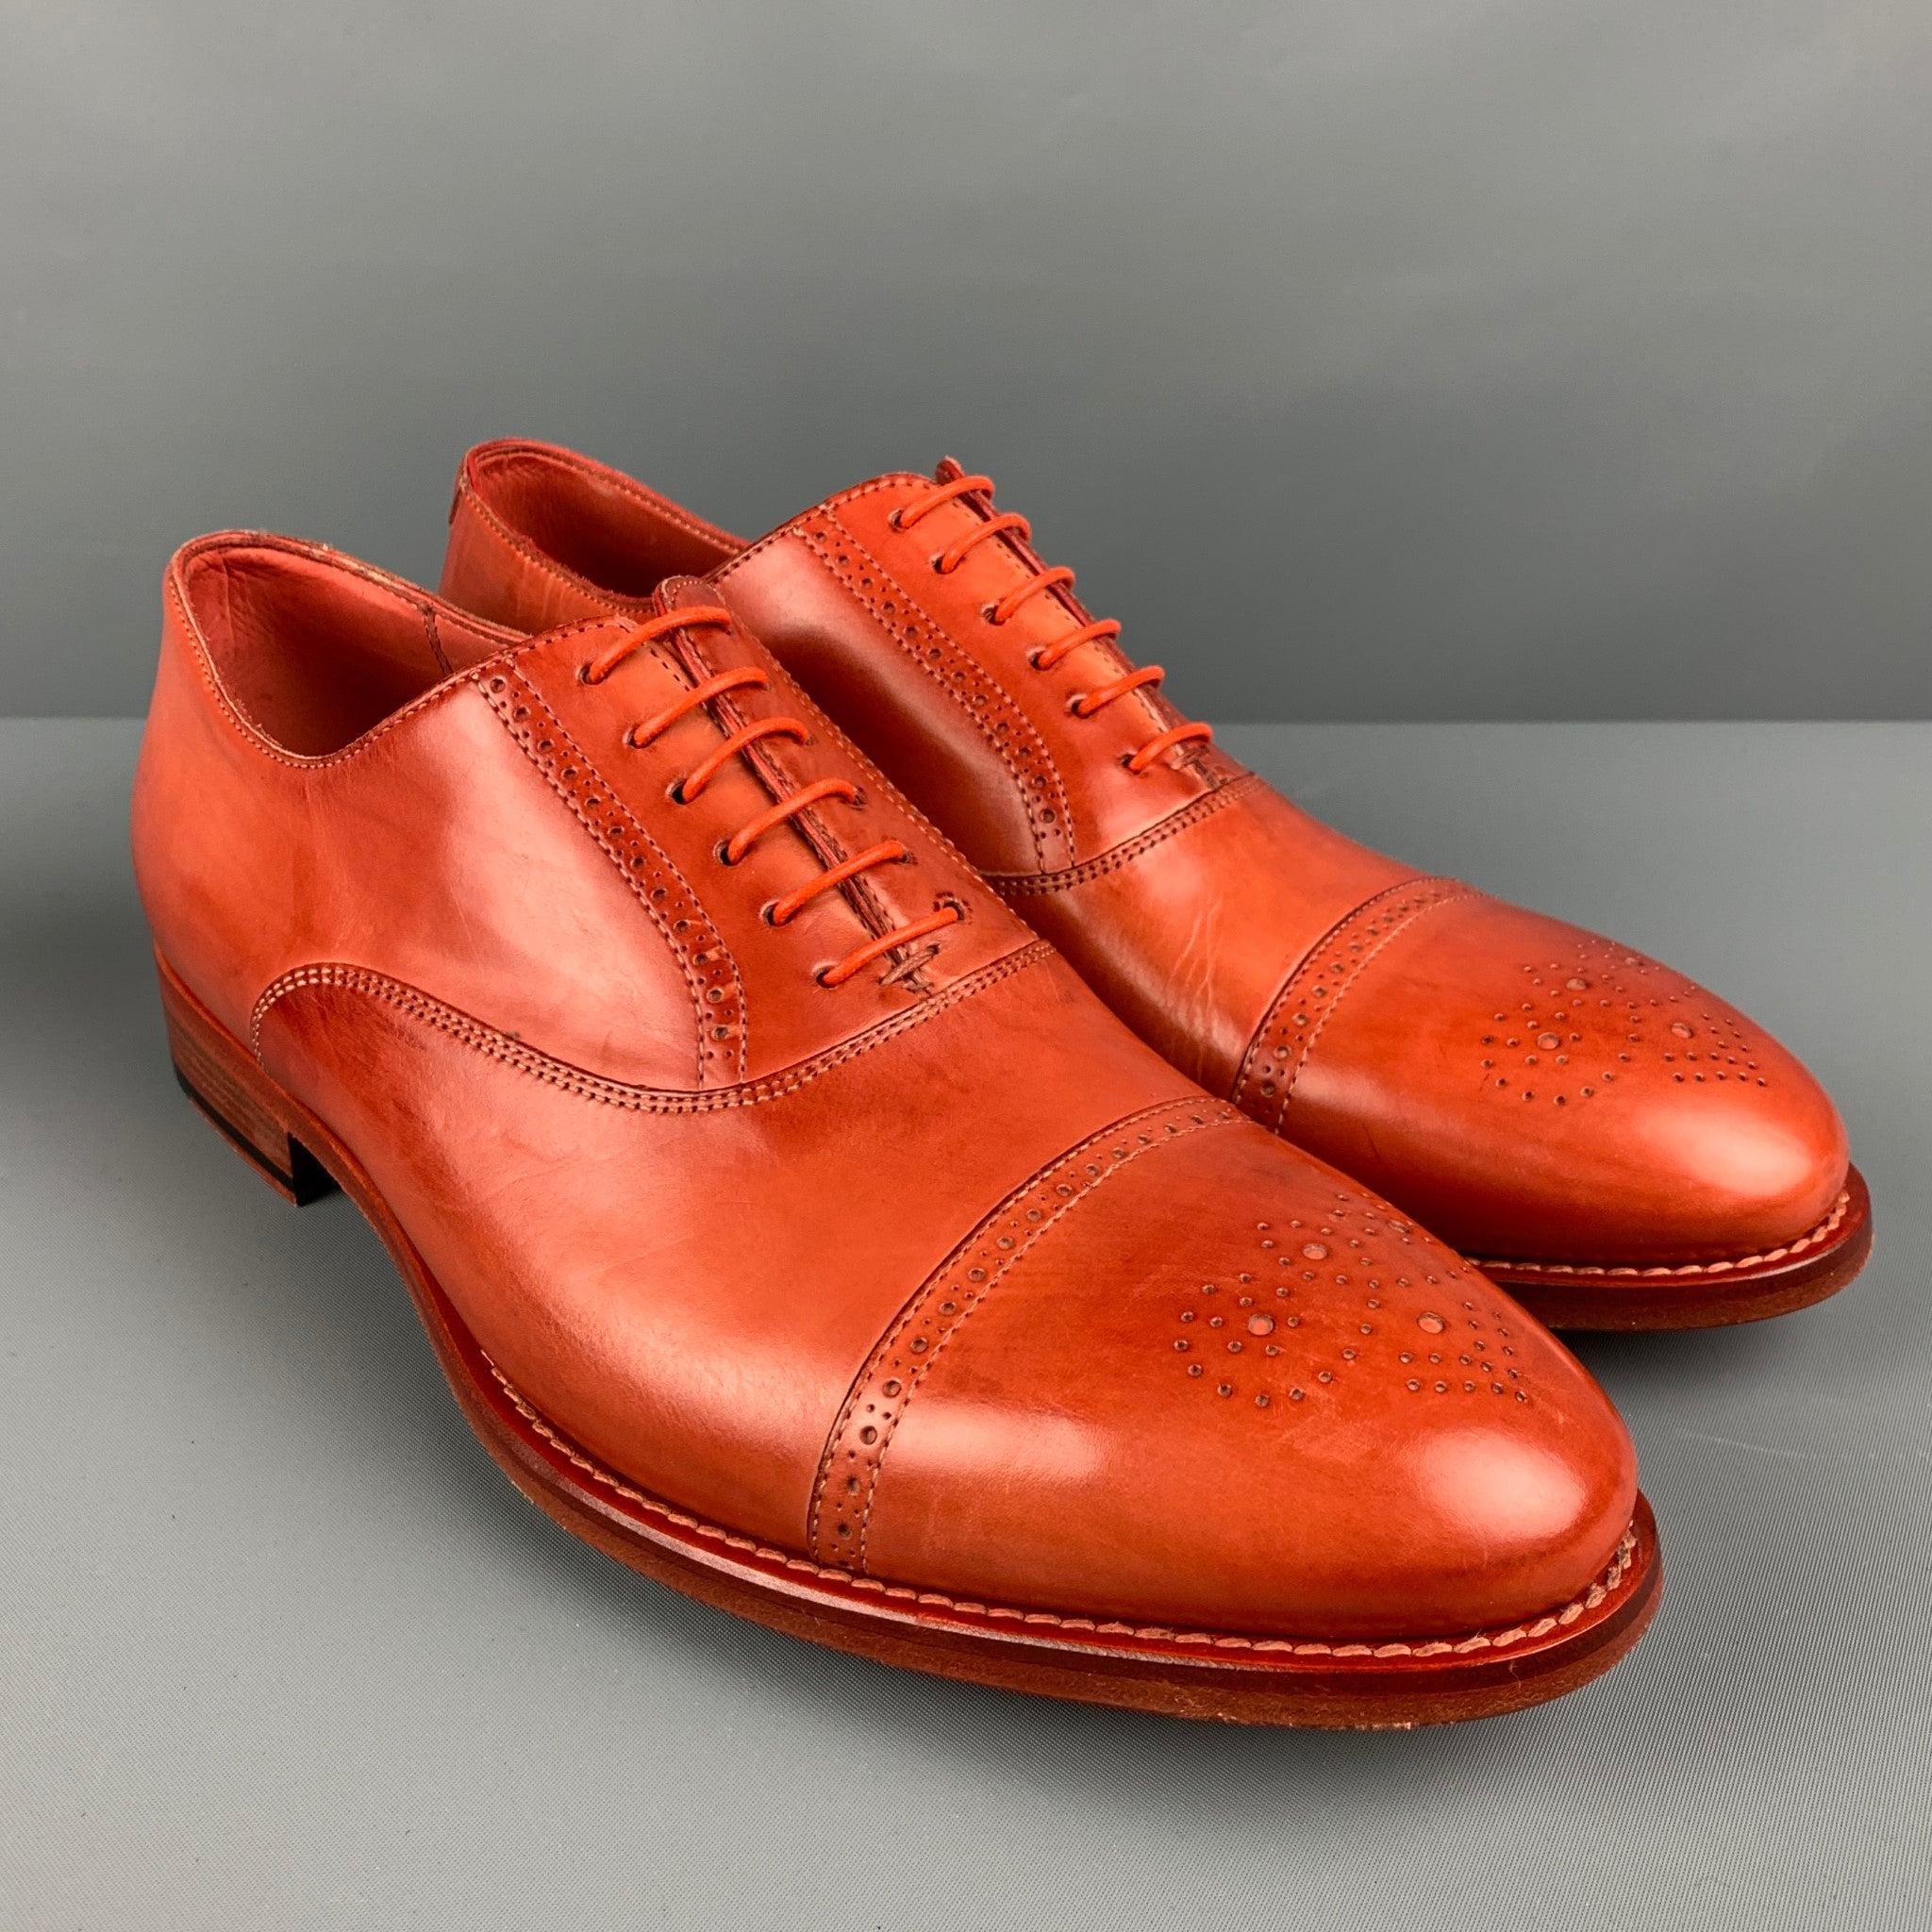 PAUL SMITH
shoes in an orange leather featuring a cap toe, perforated style, and a lace up closure. Comes with extra shoelace, dust bag, and box. Made in Italy. Very Good Pre-Owned Condition. Minor signs of wear. 

Marked:   8.5/42.5Outsole: 11.5